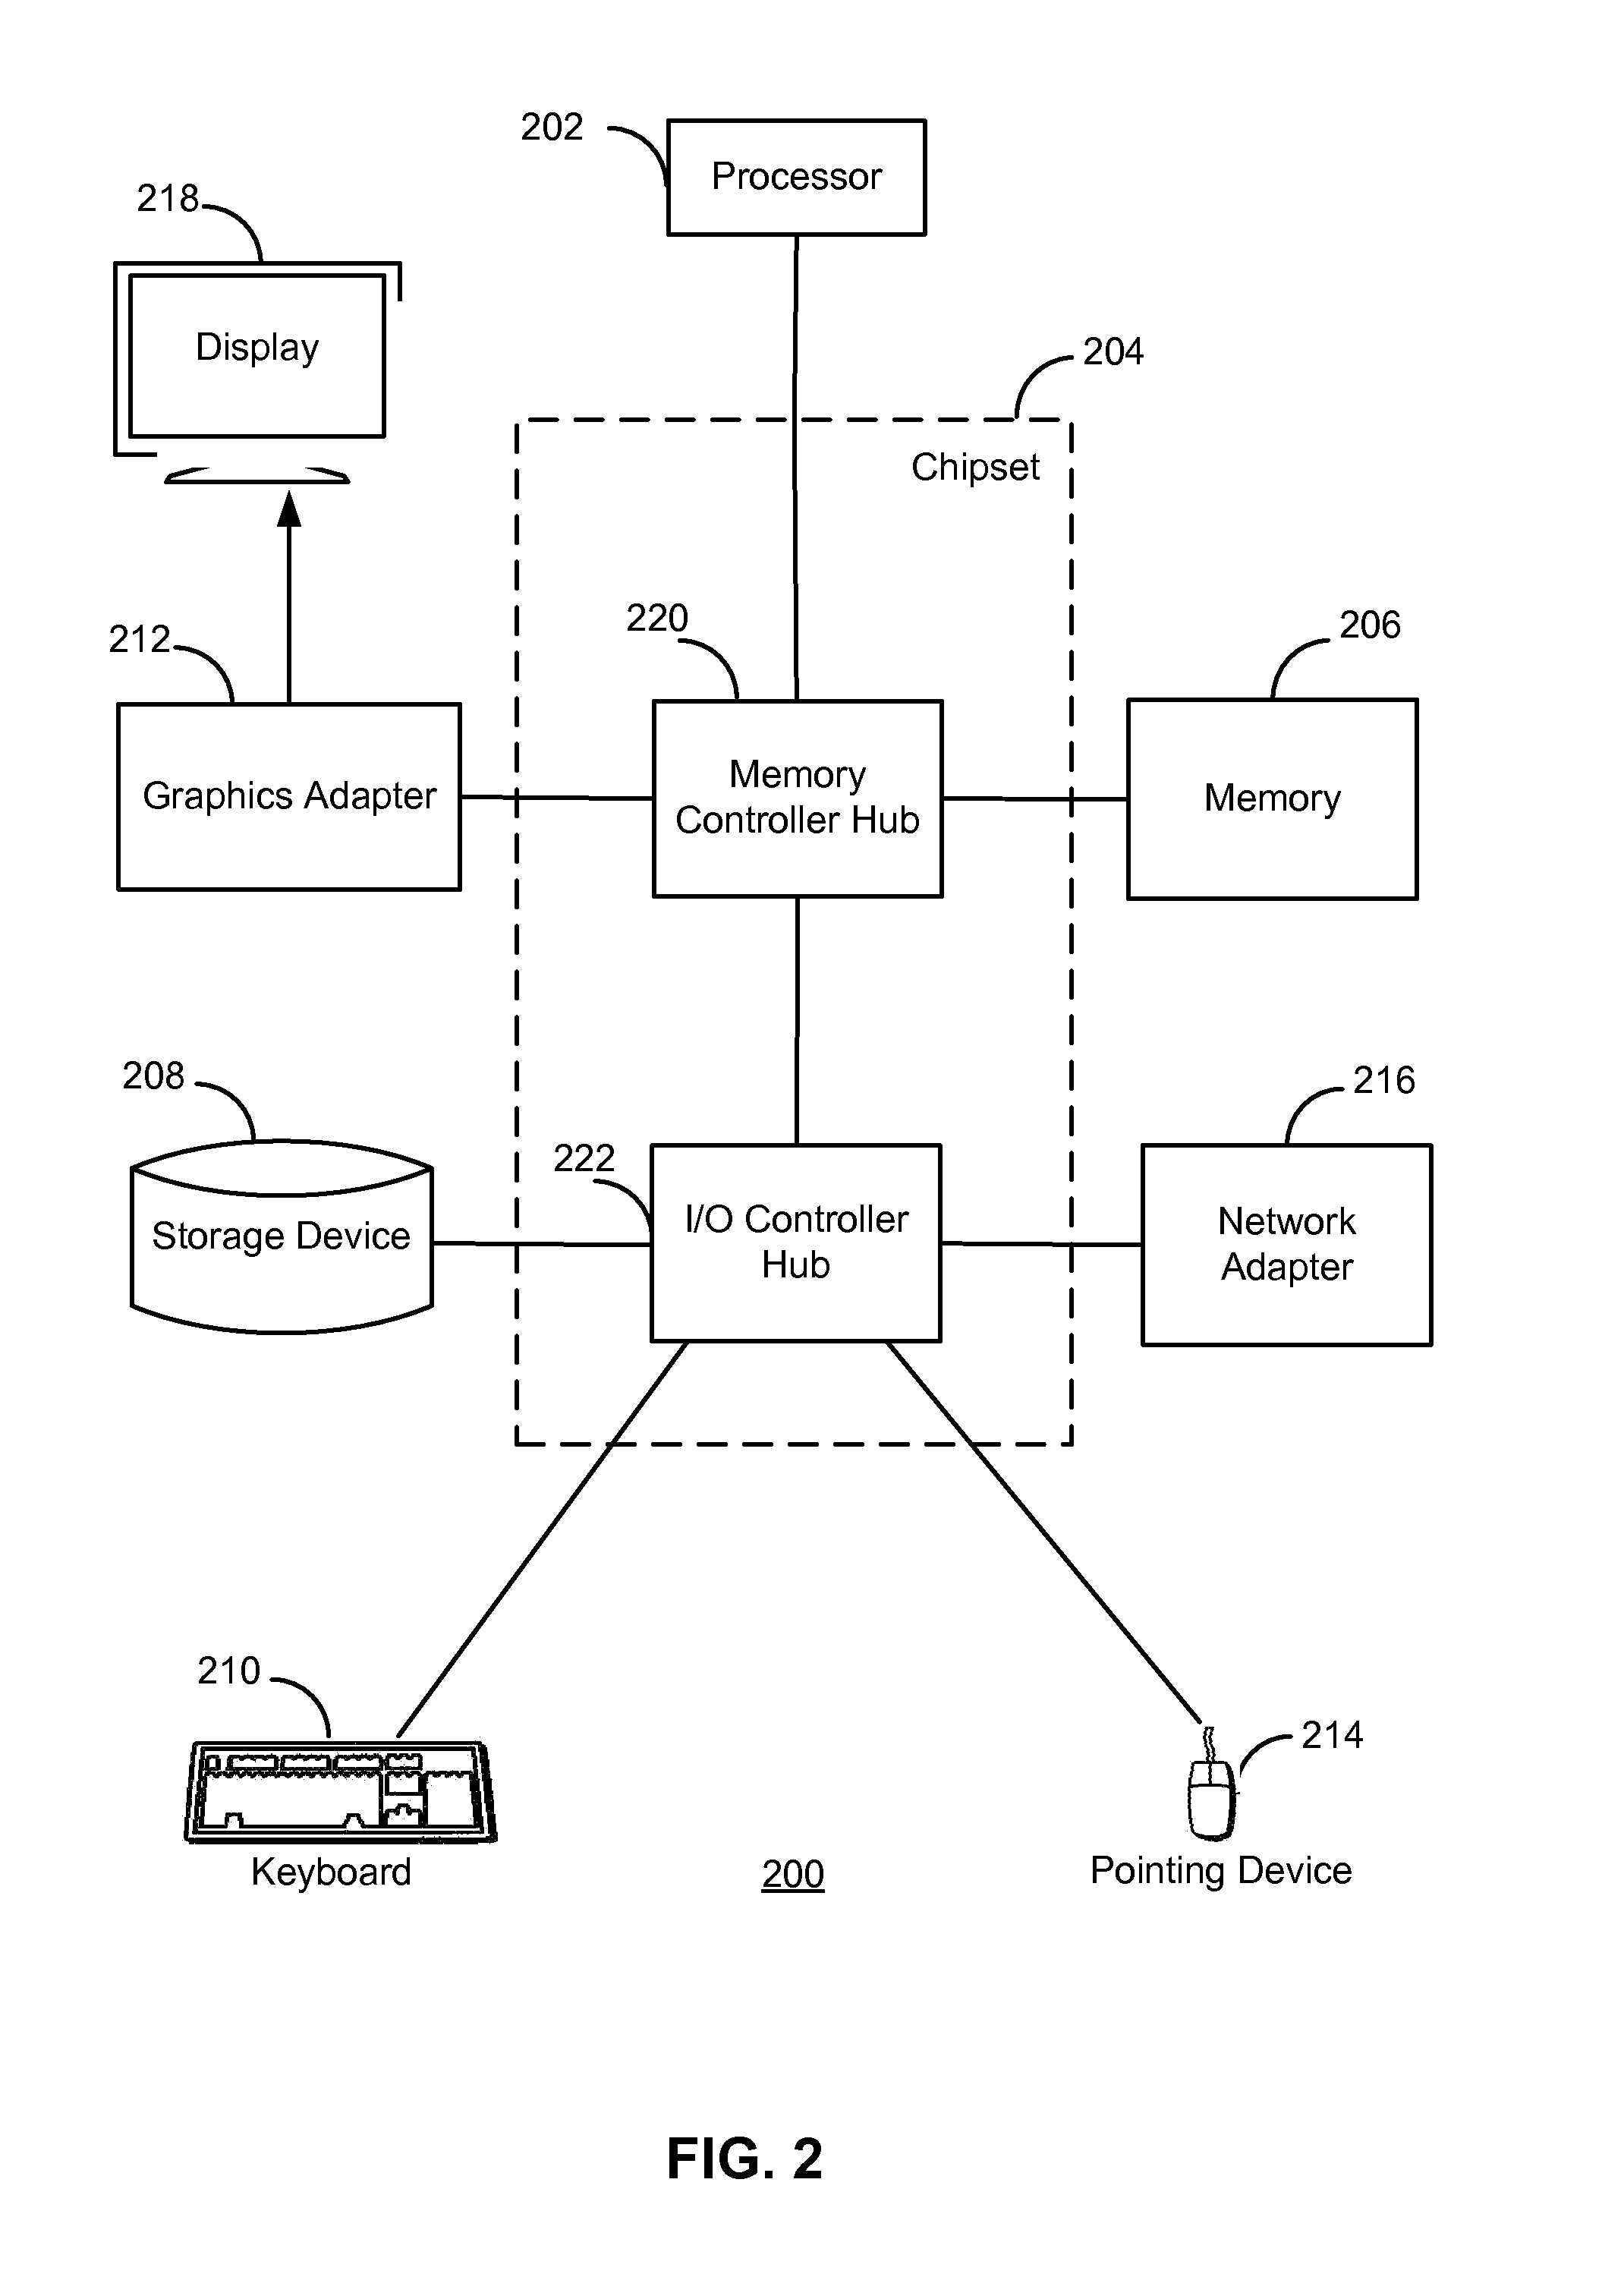 Distributed Network Security Using a Logical Multi-Dimensional Label-Based Policy Model